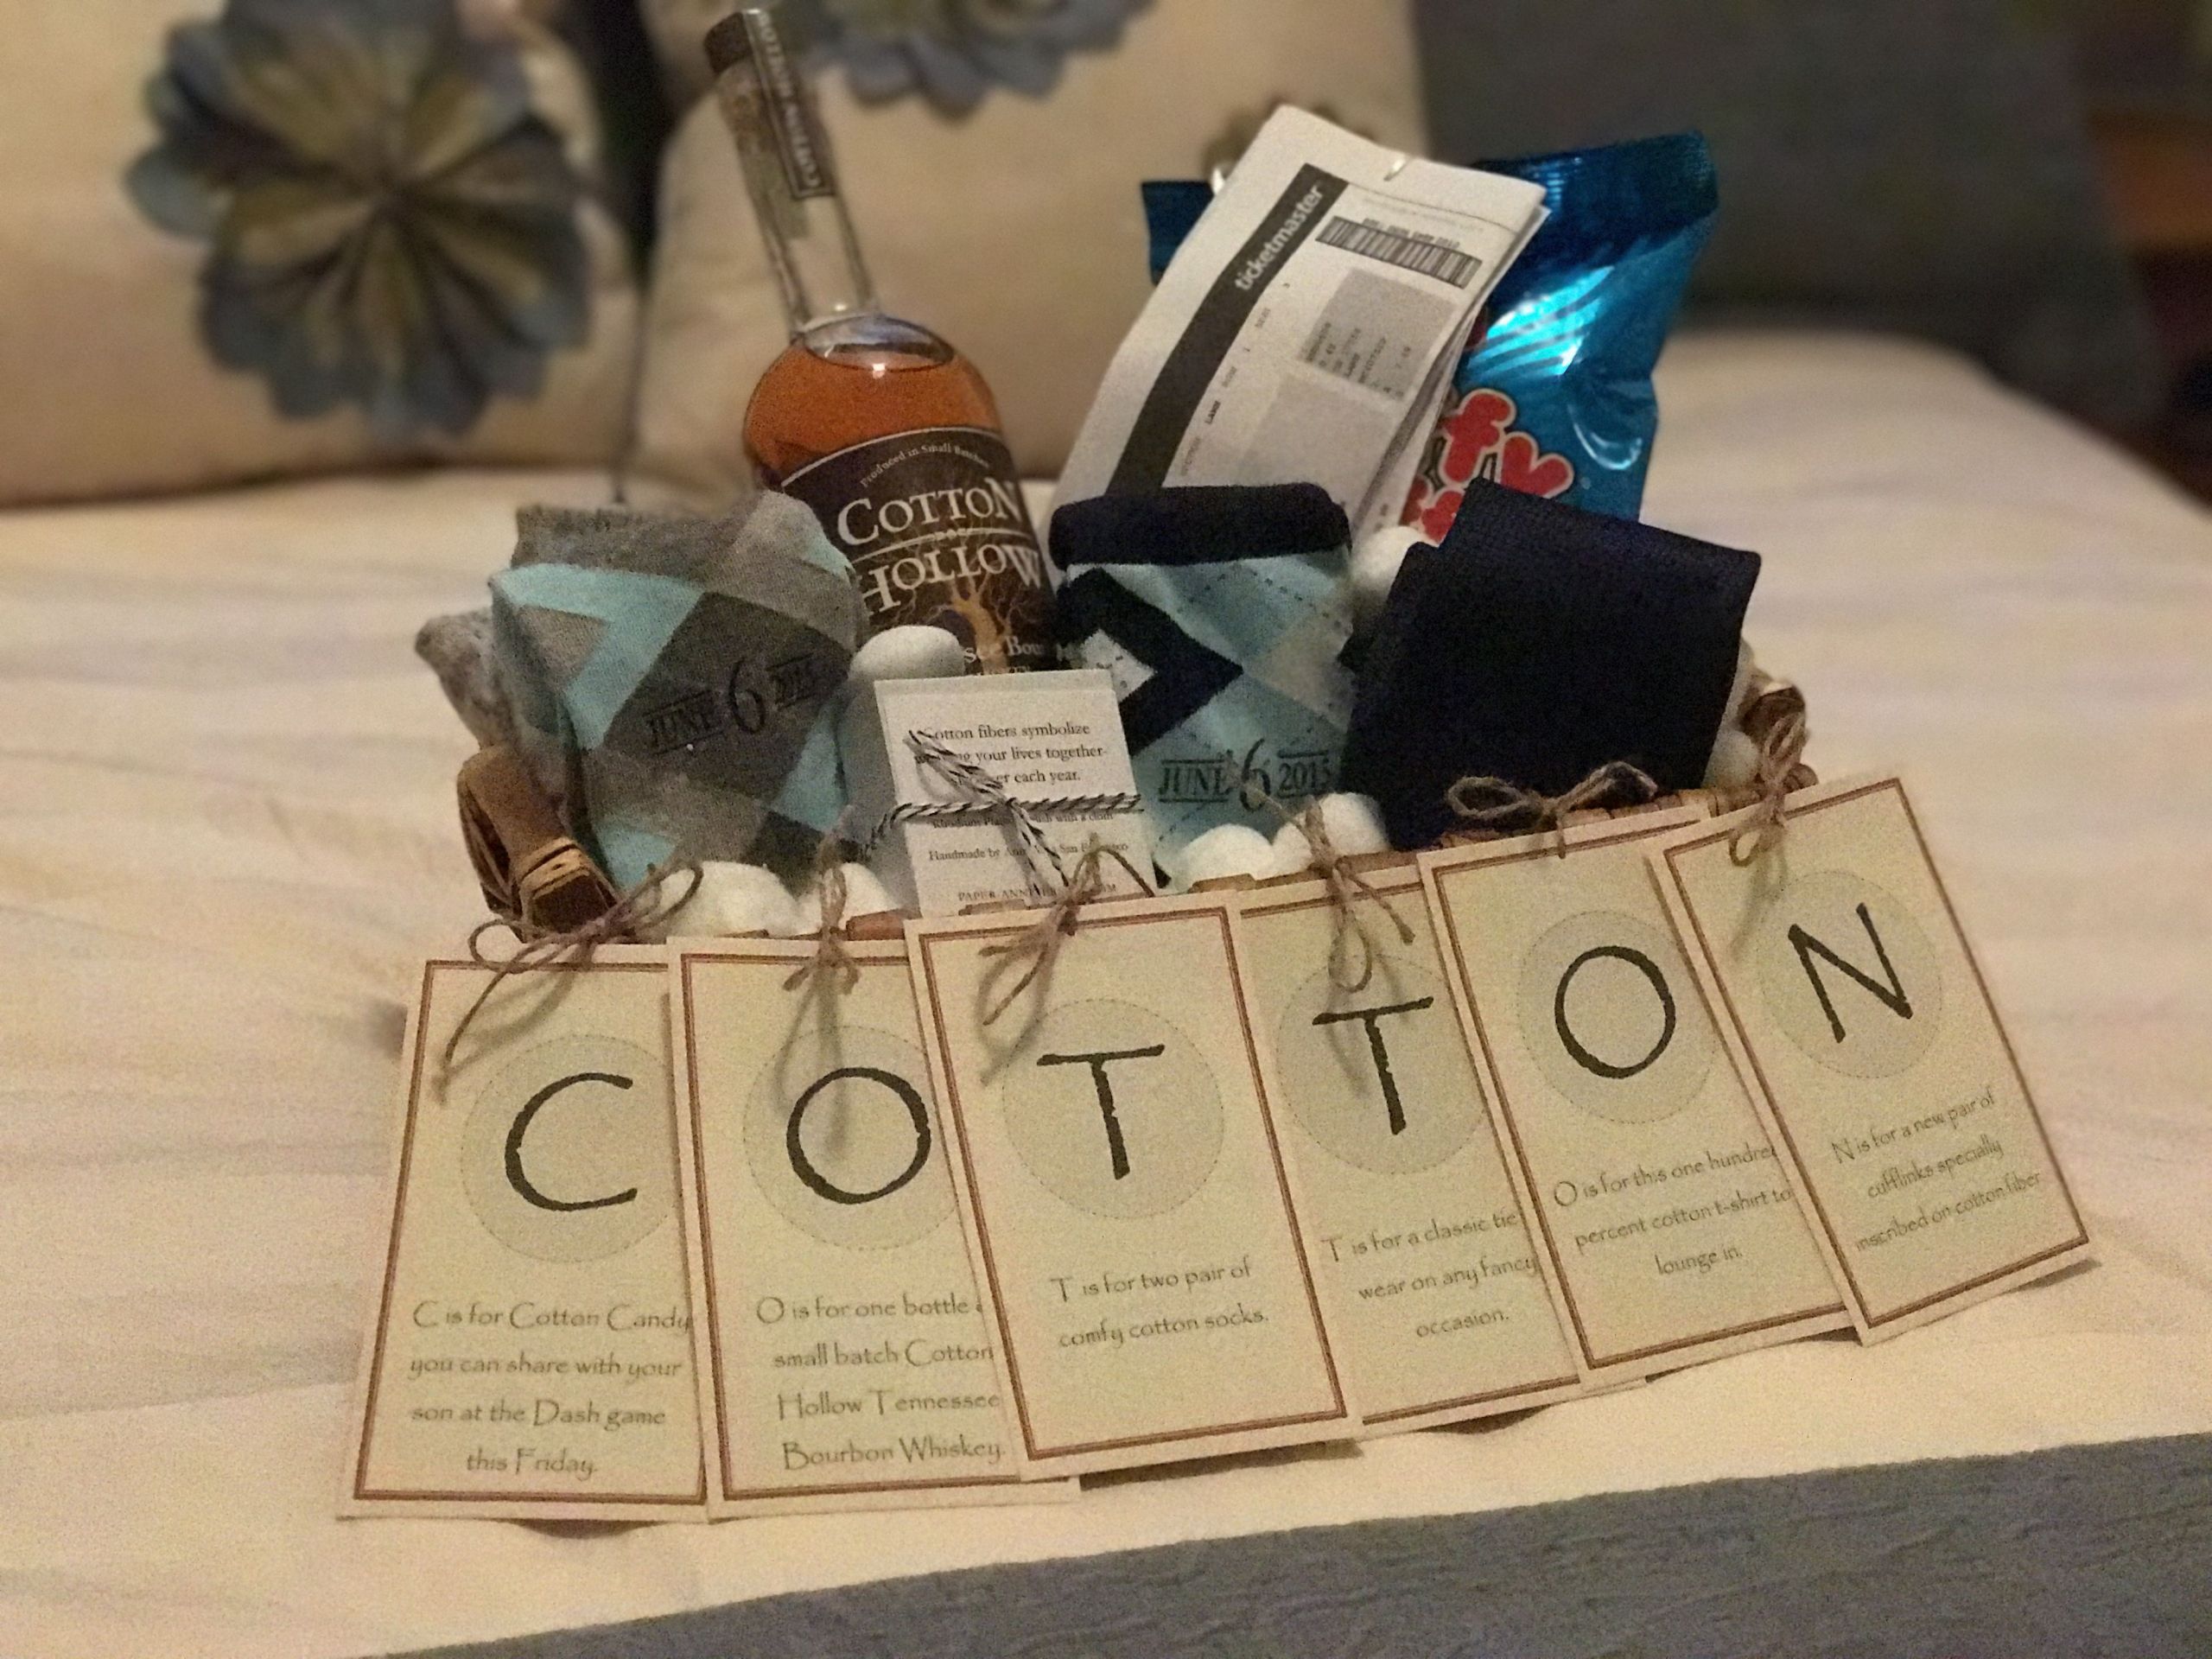 Cotton Anniversary Gift Ideas For Him
 The "Cotton" Anniversary Gift for Him